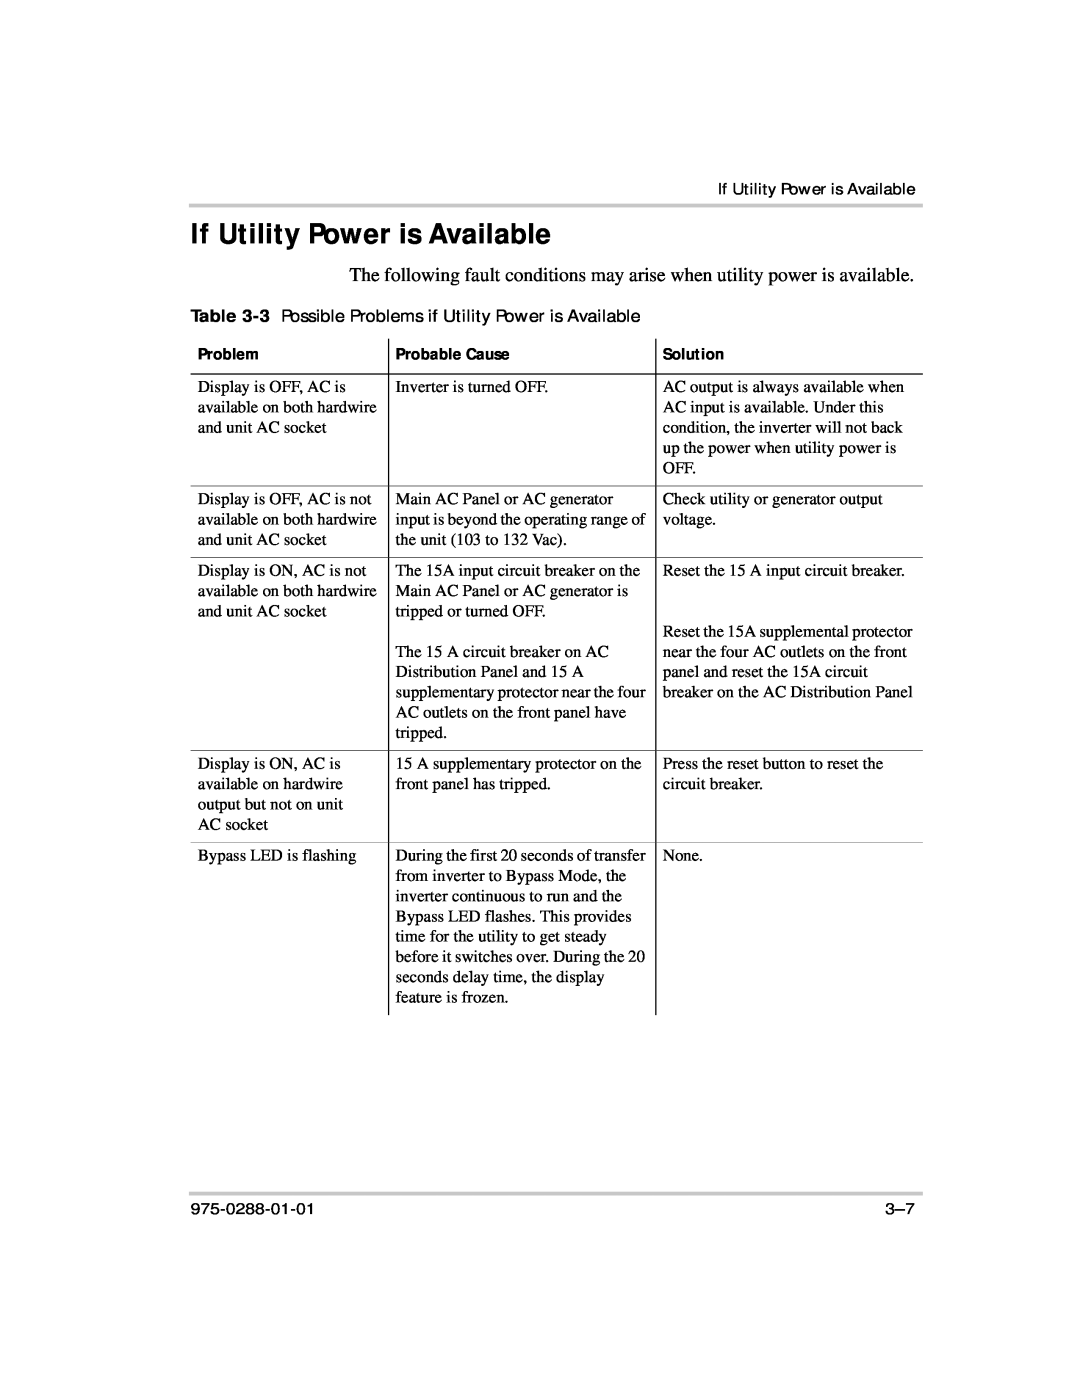 Xantrex Technology PH1800 If Utility Power is Available, 3 Possible Problems if Utility Power is Available, Probable Cause 